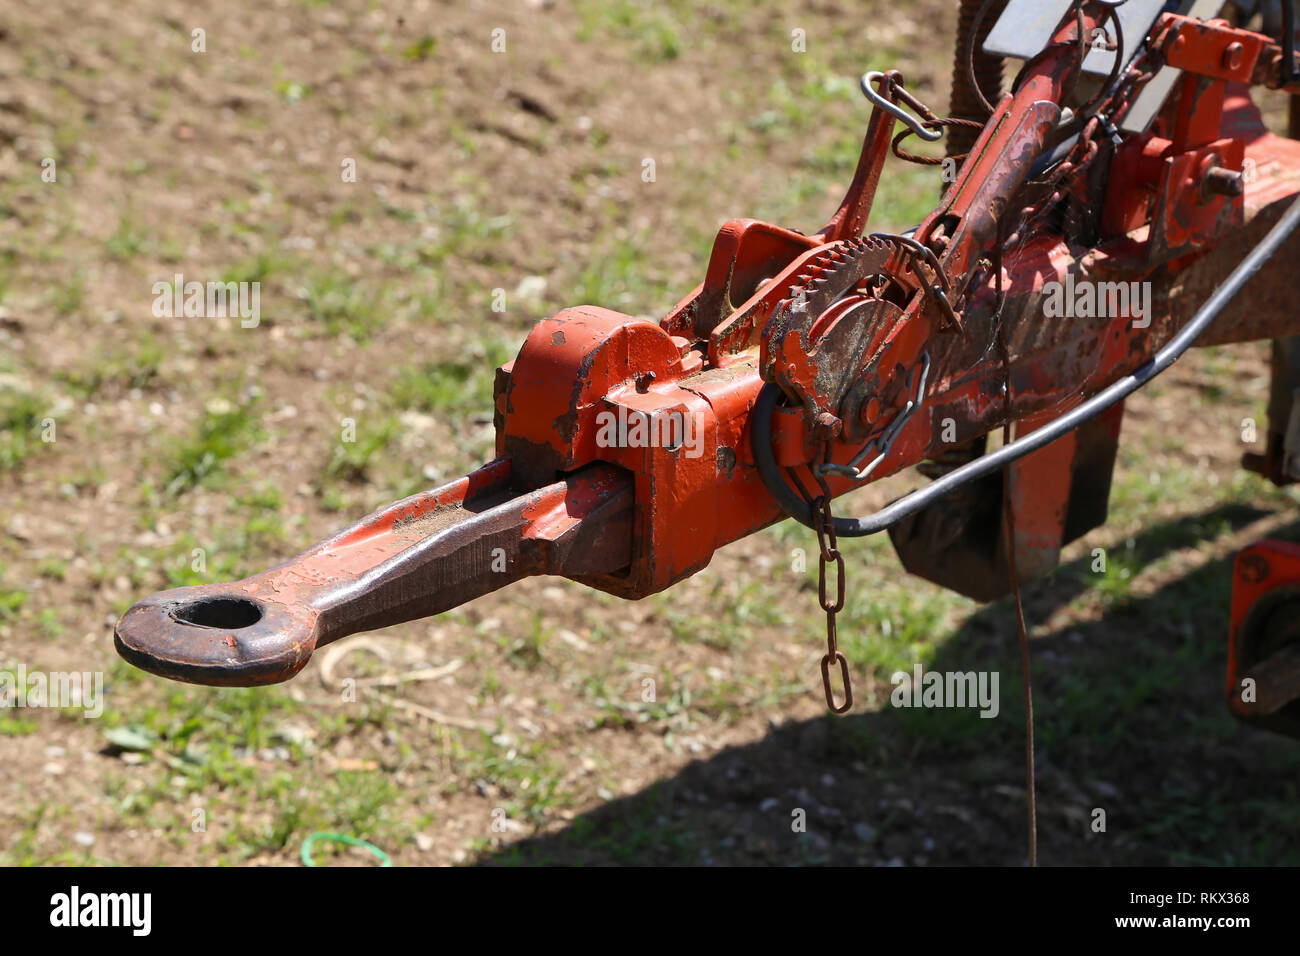 Agricultural machinery / tractor hook / Details / Agricultural